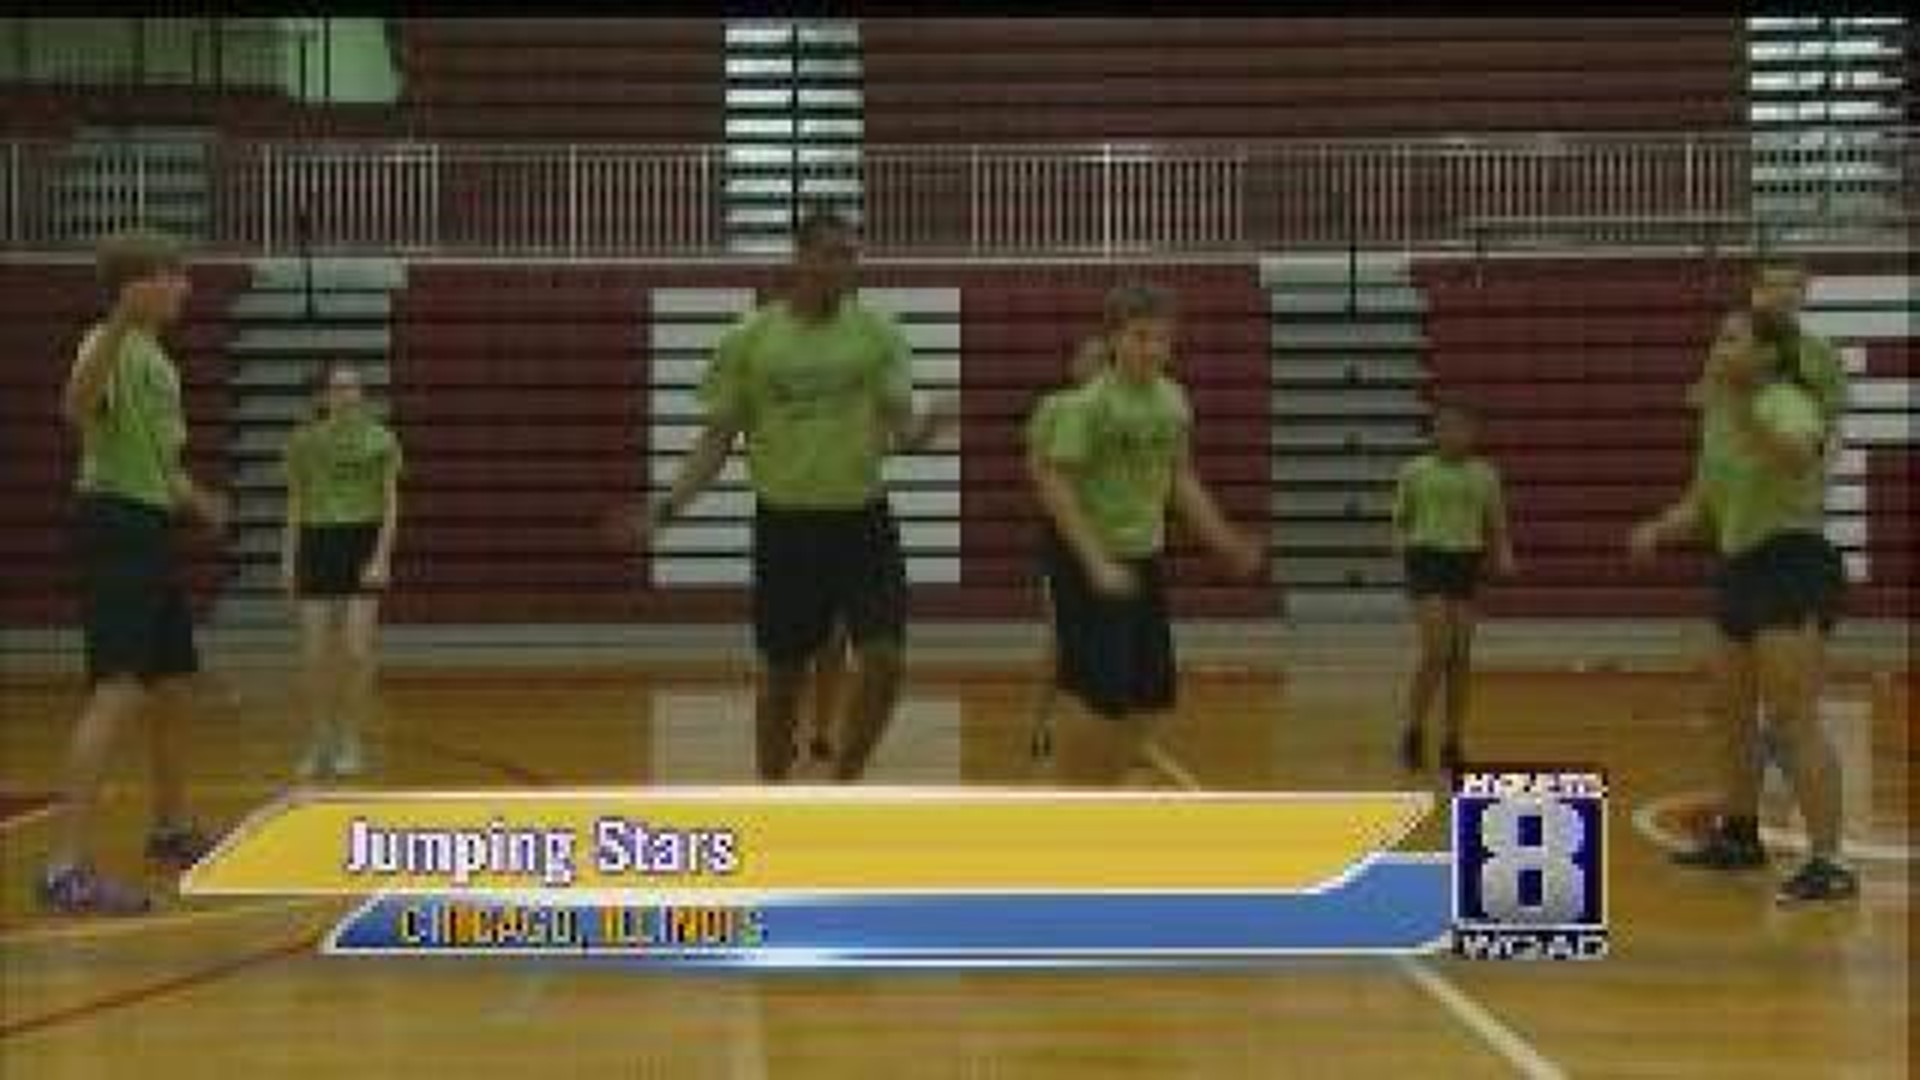 Illinois jump ropers to appear in Beyonce video